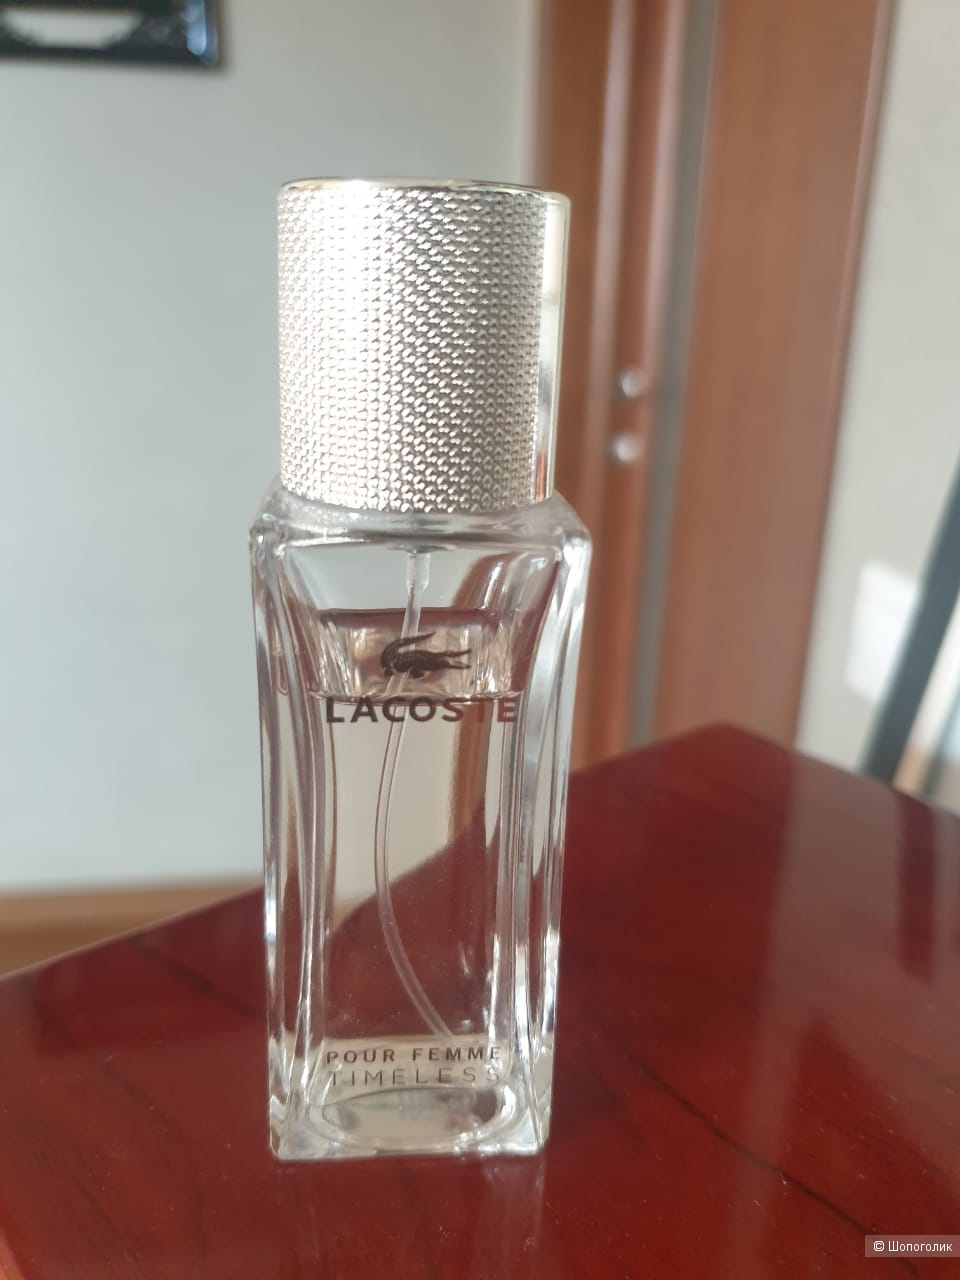 Парфюмерная вода Lacoste Pour Femme Timeless, 30 ml.